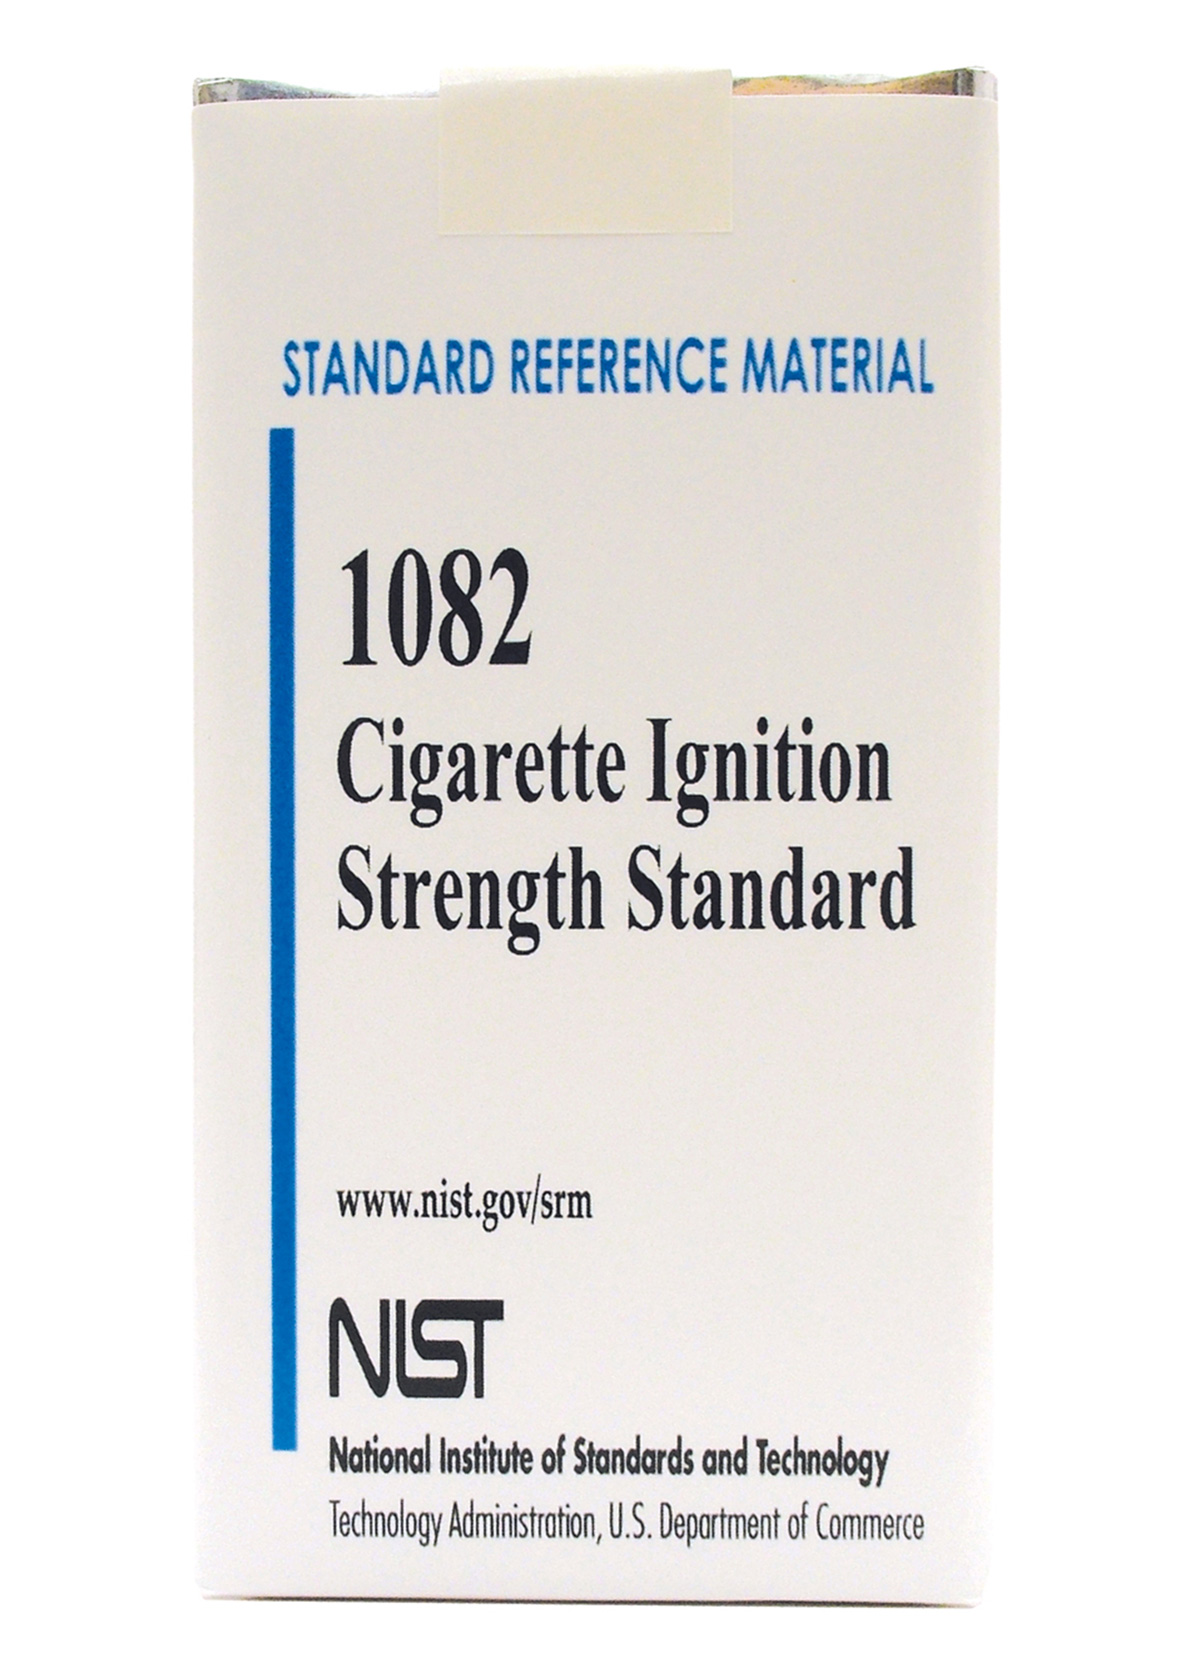 A pack of Standard Reference Material cigarettes, ignition strength. Cartons available through the National Institute of Standards and Technology for a bargain price of $126. Additional SRMs include Brick Clay (75 g, $282), Titanium Alloy (50 g, $356), Carbon Dioxide in Air (cylinder, $1,794), Baby Food Composite (4 x 70 g, $402), Organics in Whale Blubber (2 x 15 g, $381), and Peanut Butter (3 x 170 g, $545). For the full listing of available SRMs, visit https://srmors.nist.gov/pricerpt.cfm [link defunct—Eds.]. Photo Ryo Manabe.